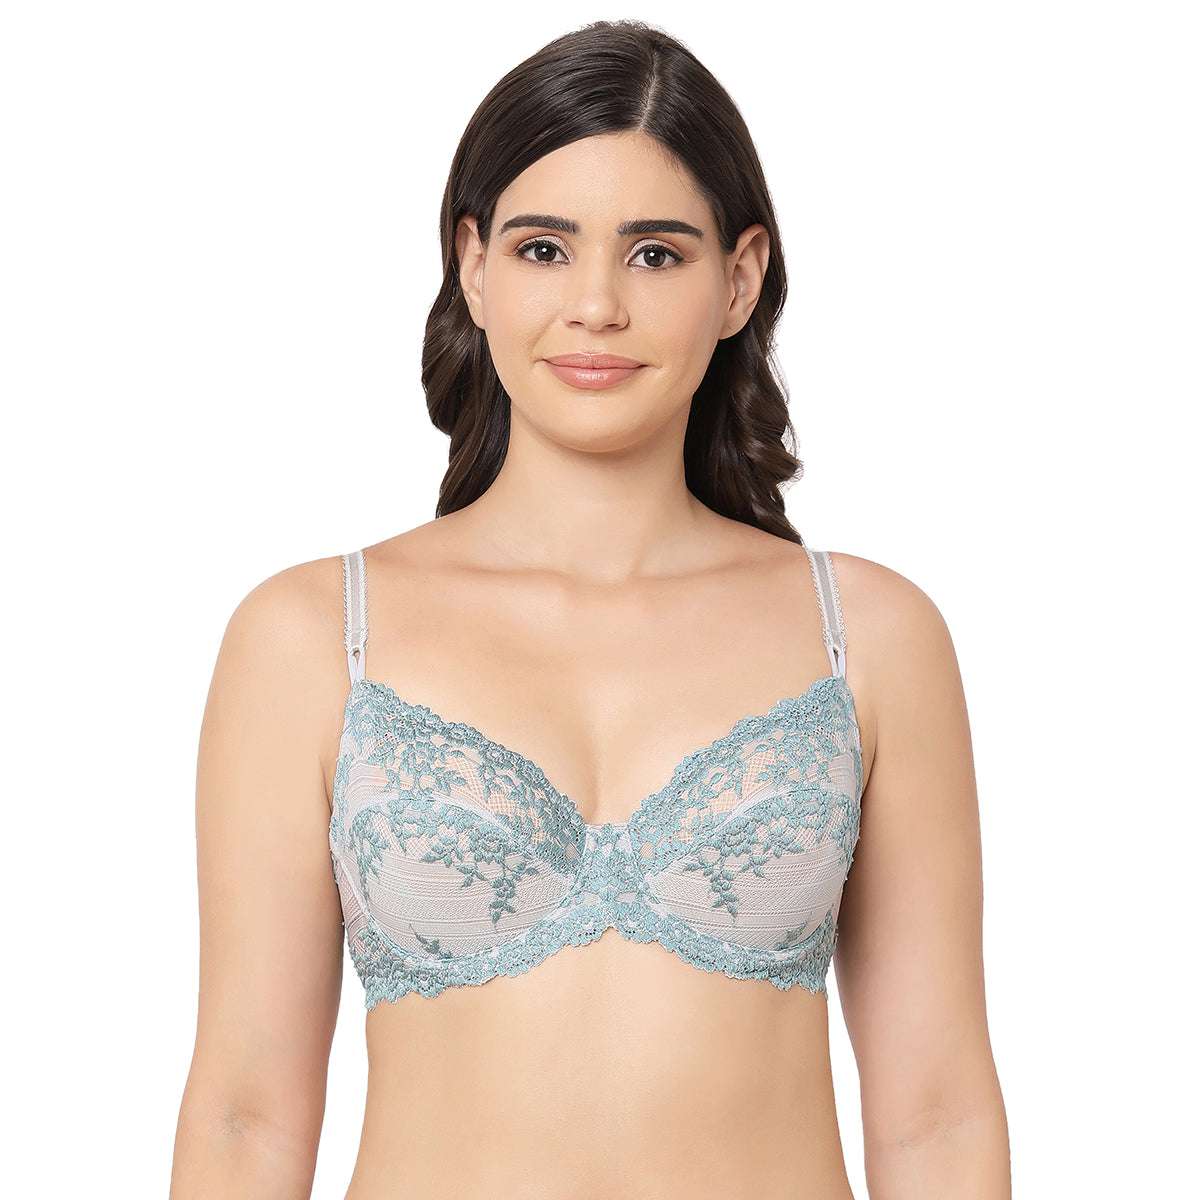 Buy Padded Non-Wired Full Cup Bra in Navy - Lace Online India